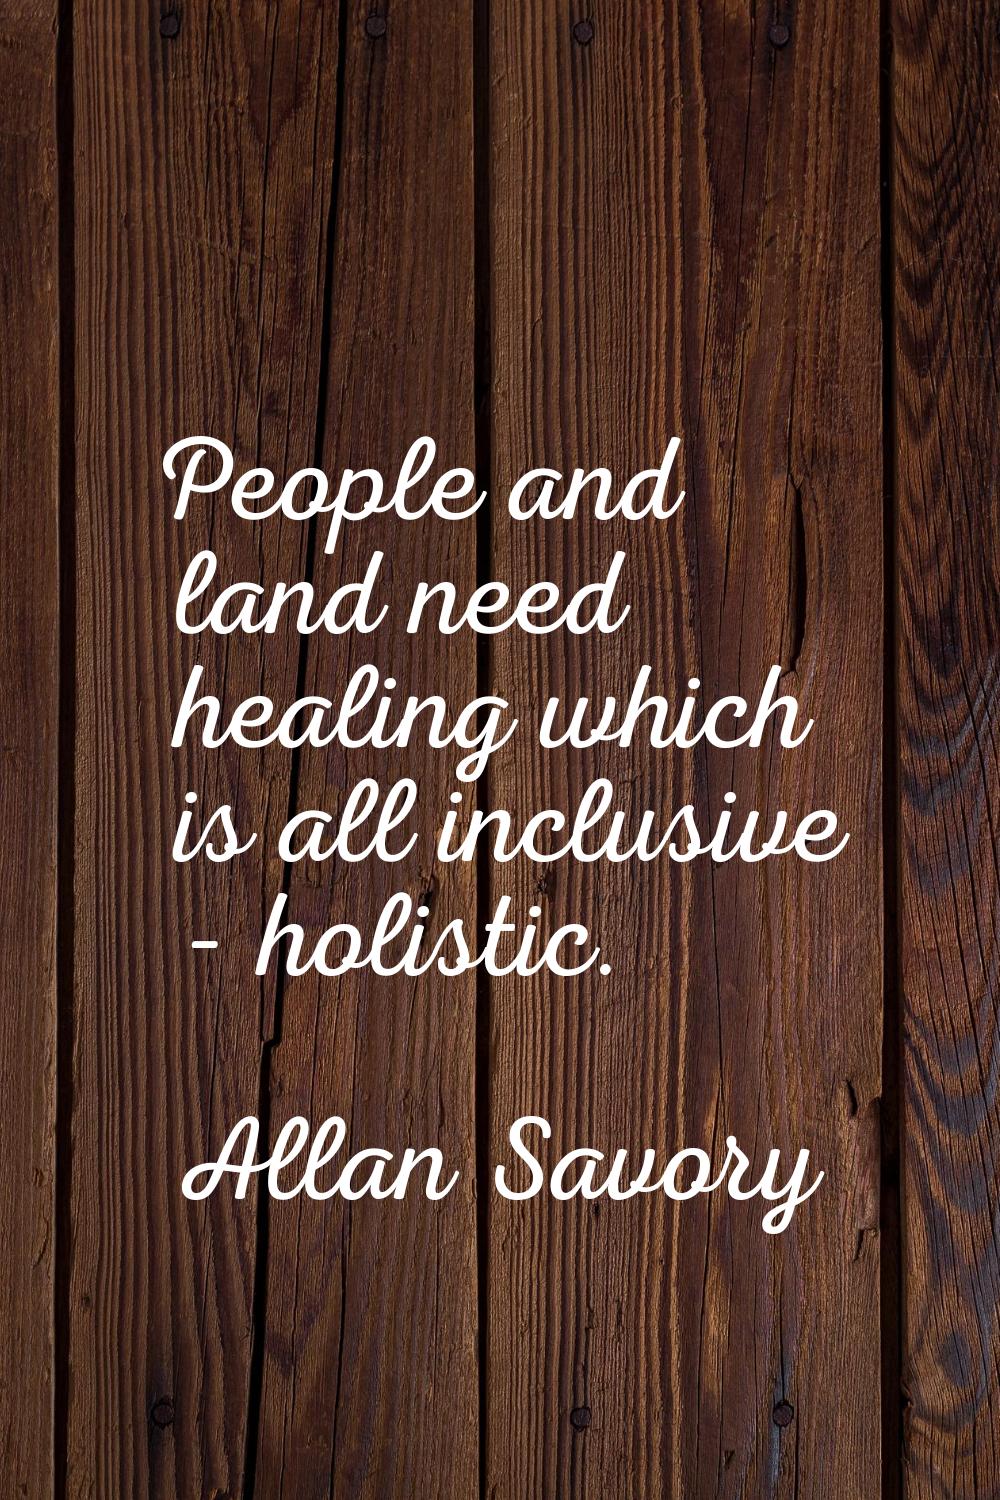 People and land need healing which is all inclusive - holistic.